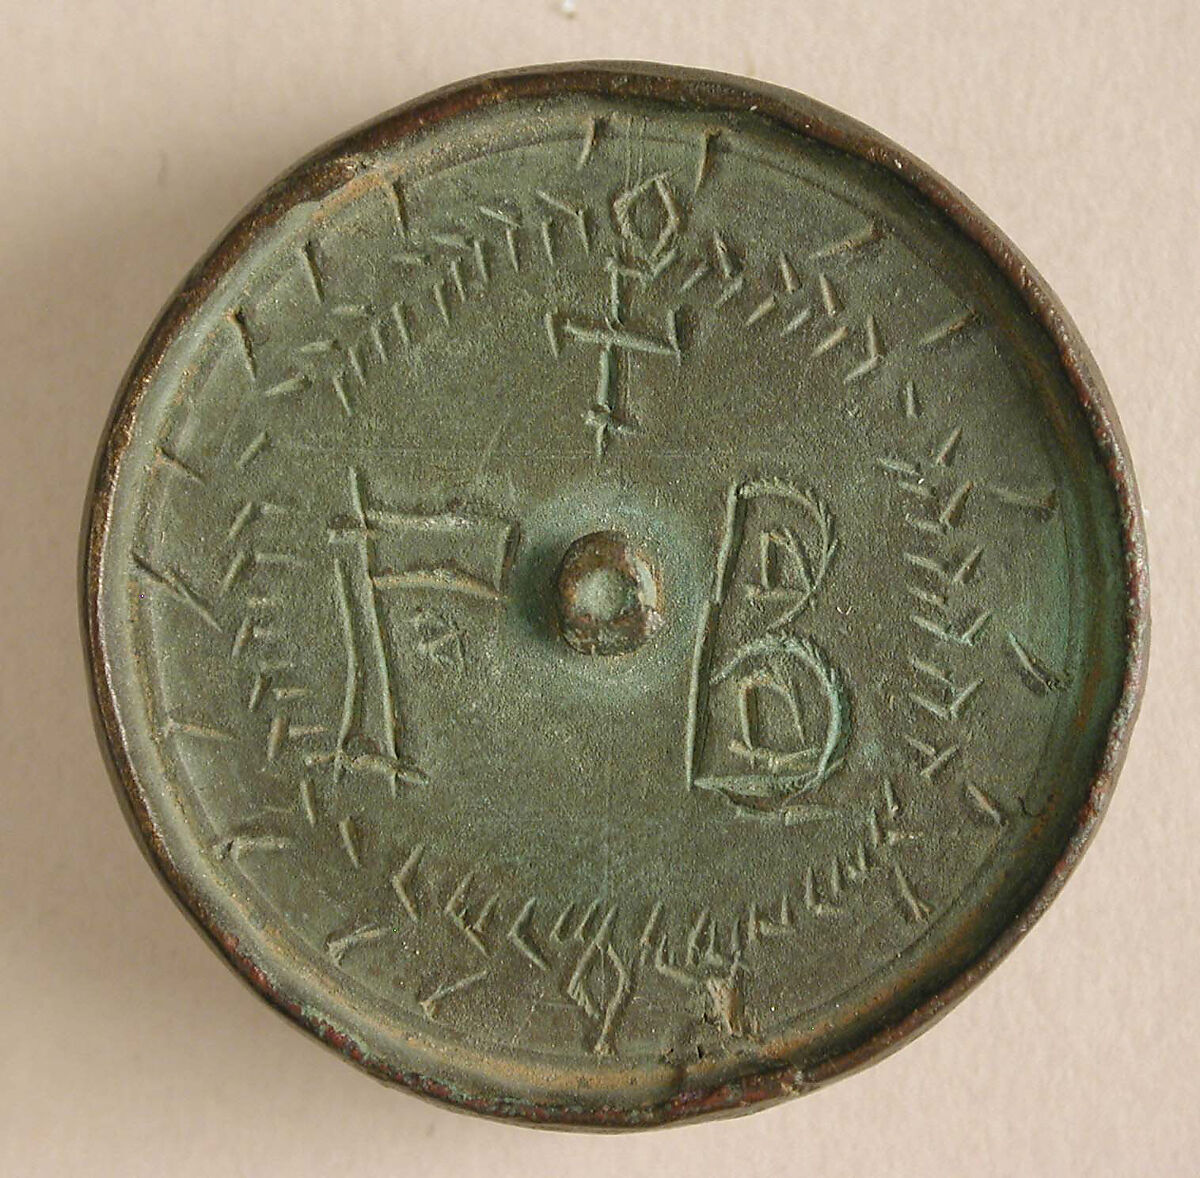 Three Round Copper-Alloy Balance Weights with Crosses, Copper alloy, Byzantine 